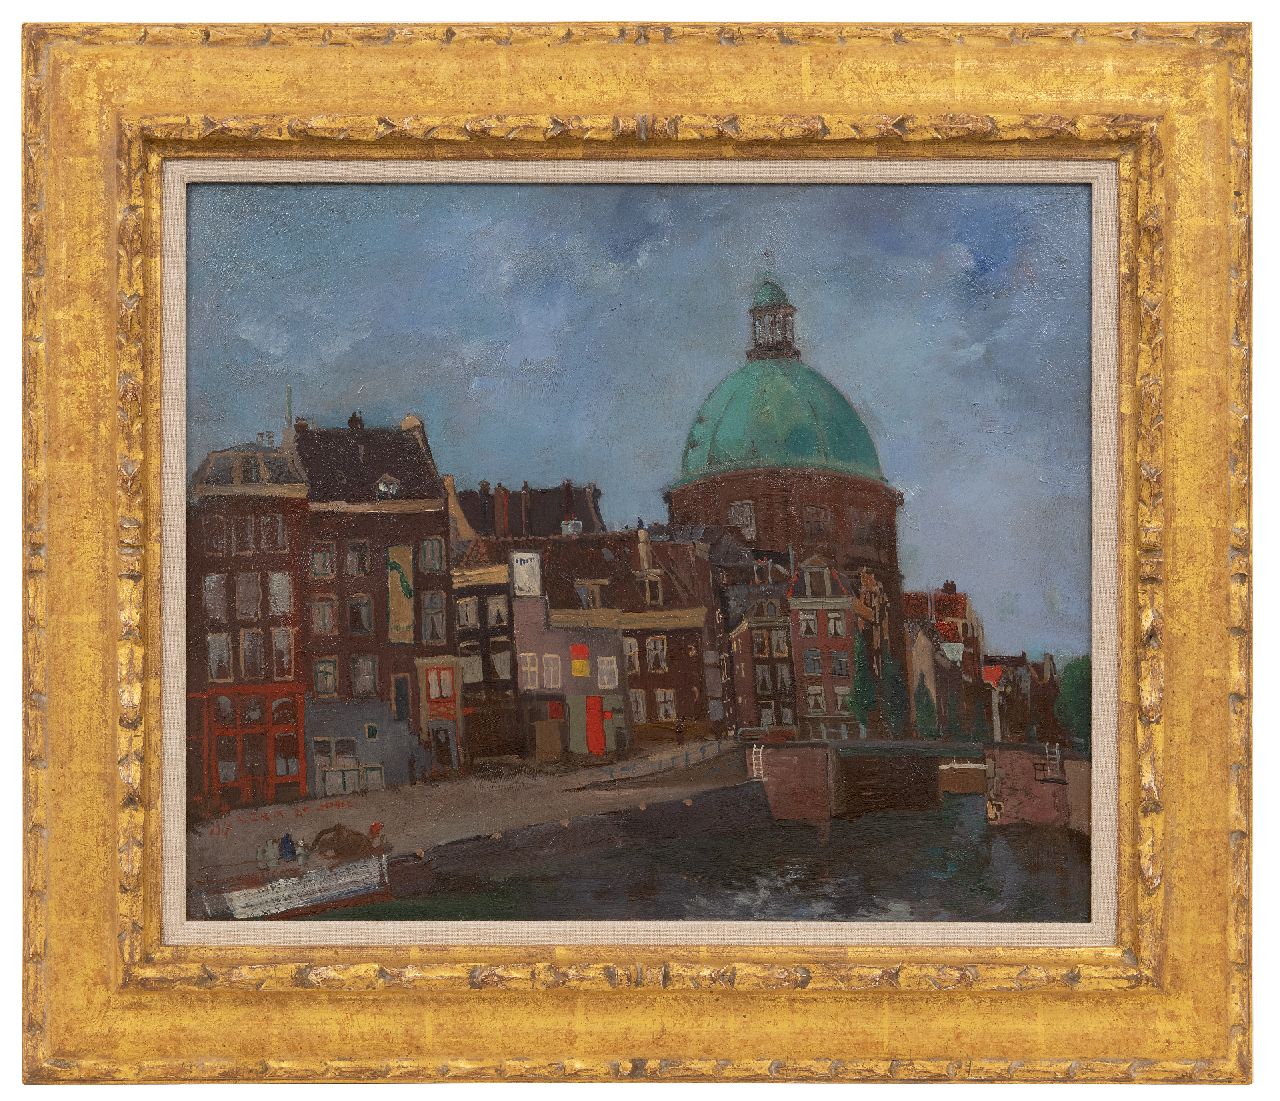 Jong G. de | Gerben 'Germ' de Jong | Paintings offered for sale | A view of Amsterdam with the Koepel church, oil on board laid down on panel 37.4 x 45.9 cm, signed l.l. and dated 1941